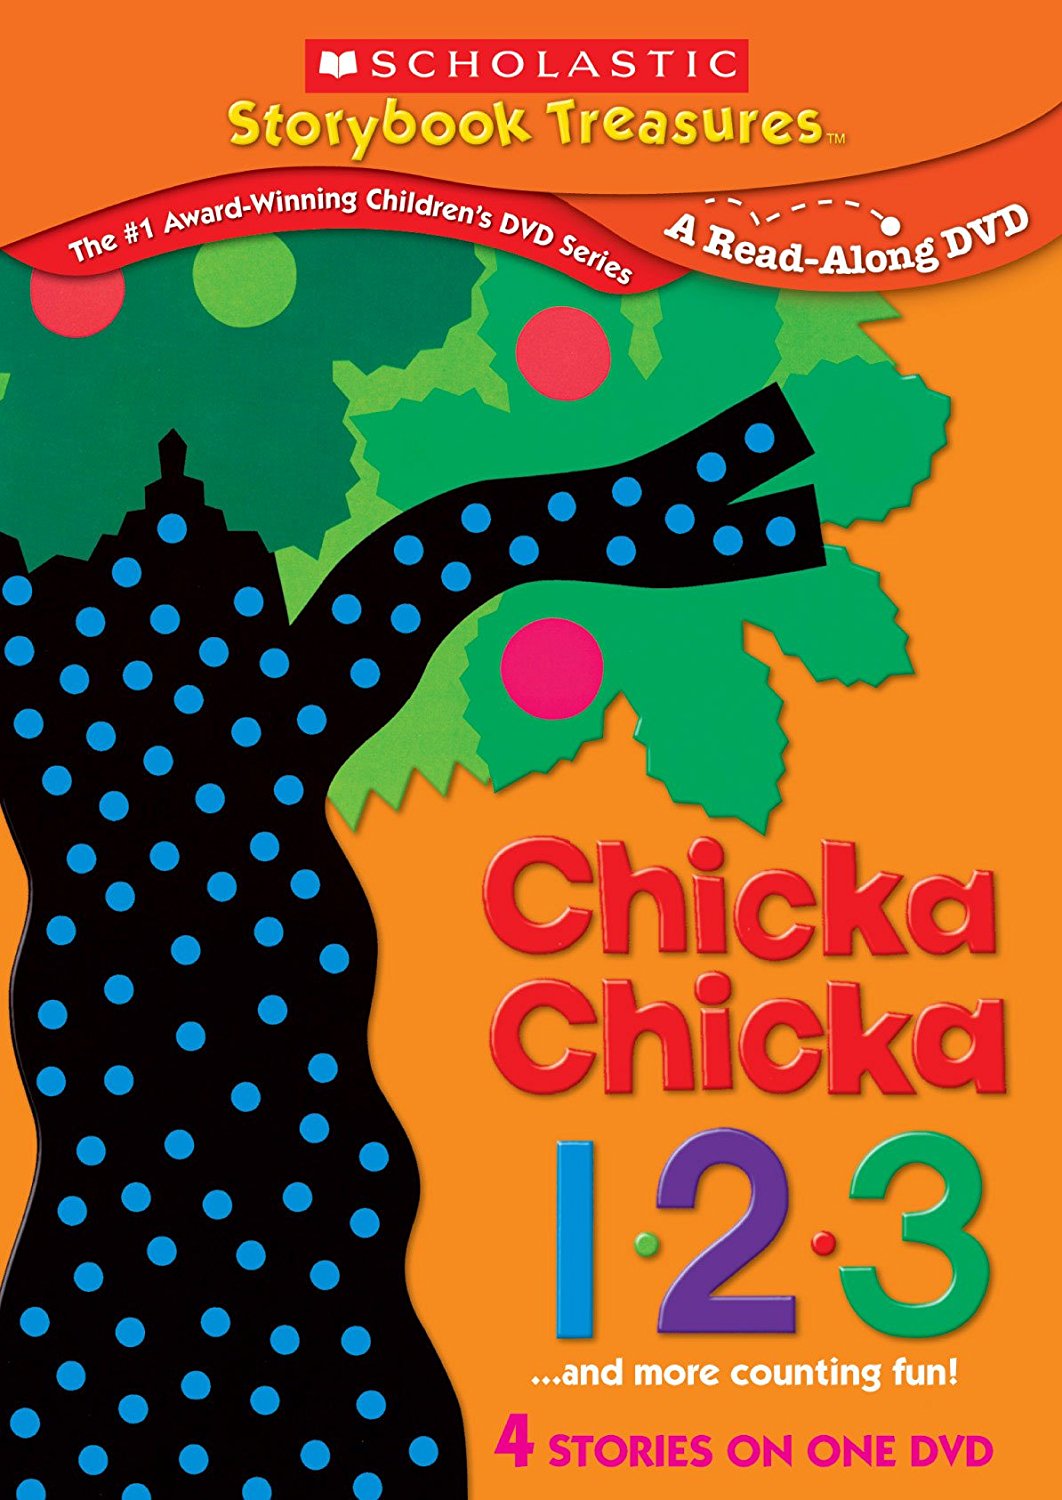 Chicka Chicka 123 And More Counting Fun - A Read Along by Scholastic Storybook Treasures